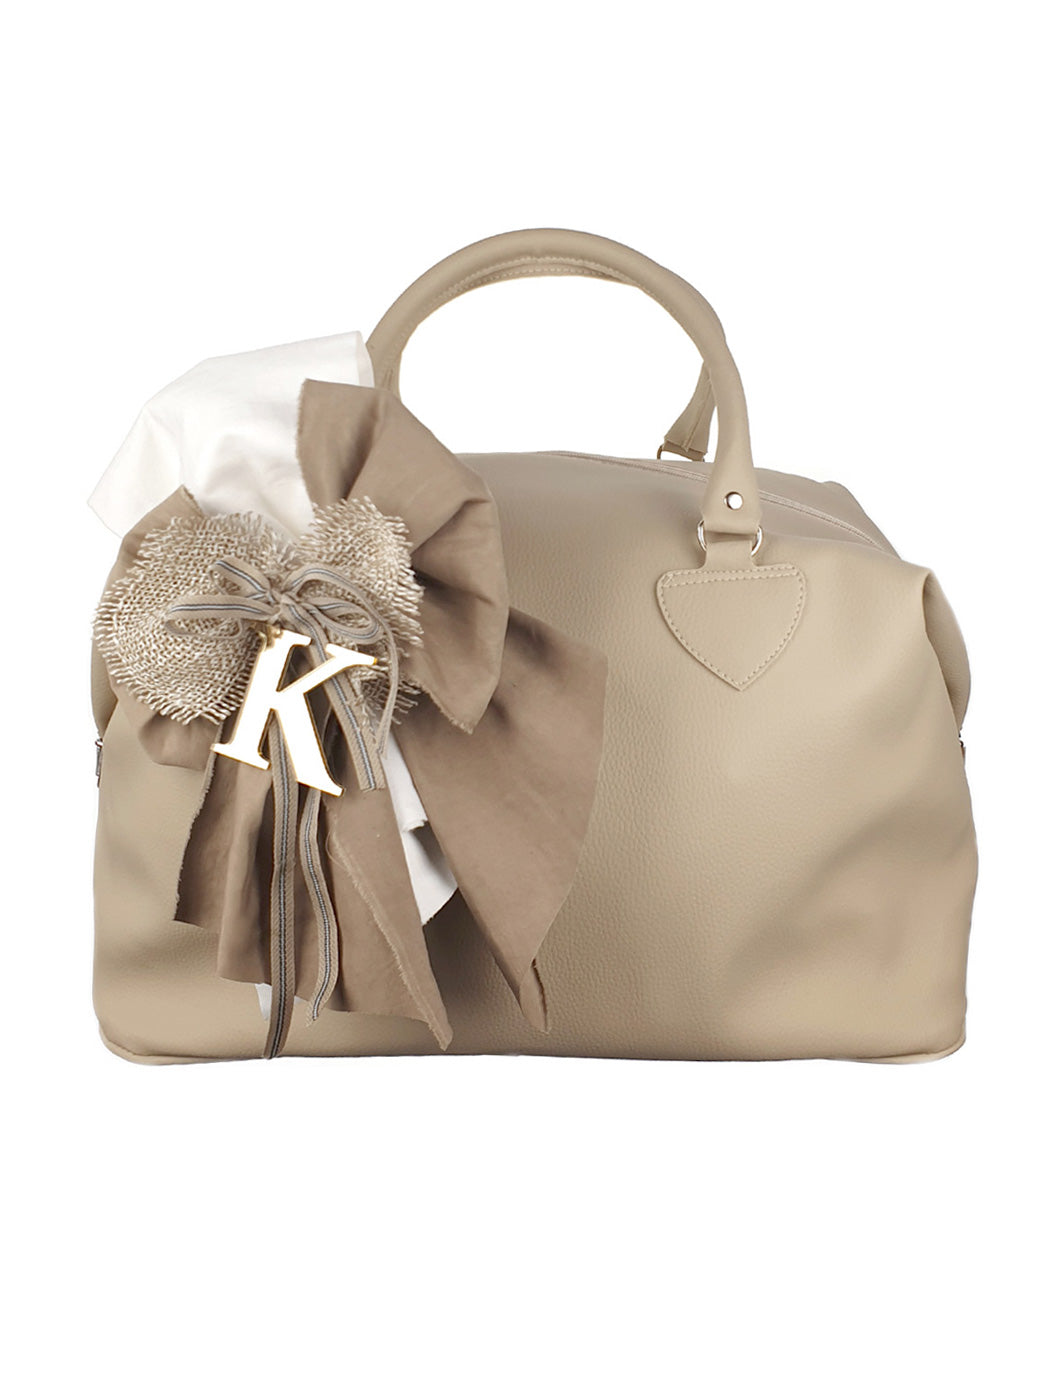 Baptism Beige Bag with leather-looks like